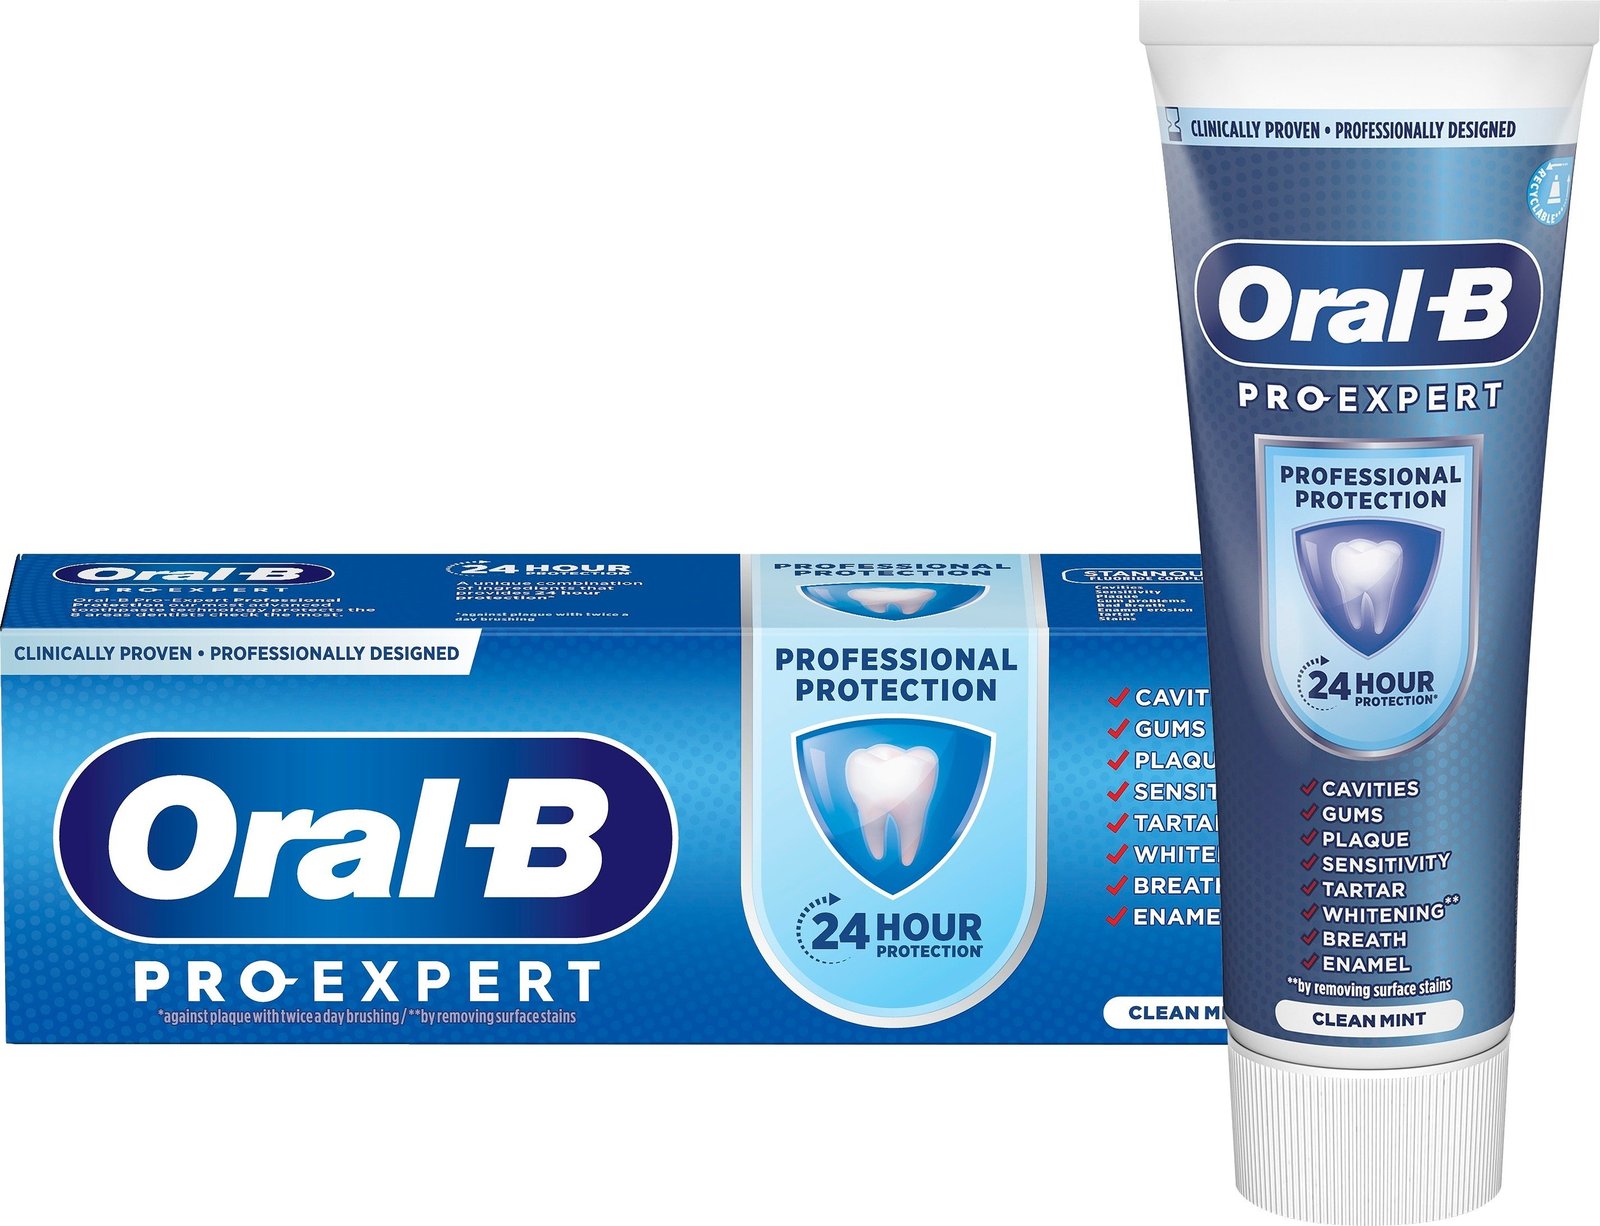 Oral-B Pro Expert Professional Protection 75 ml